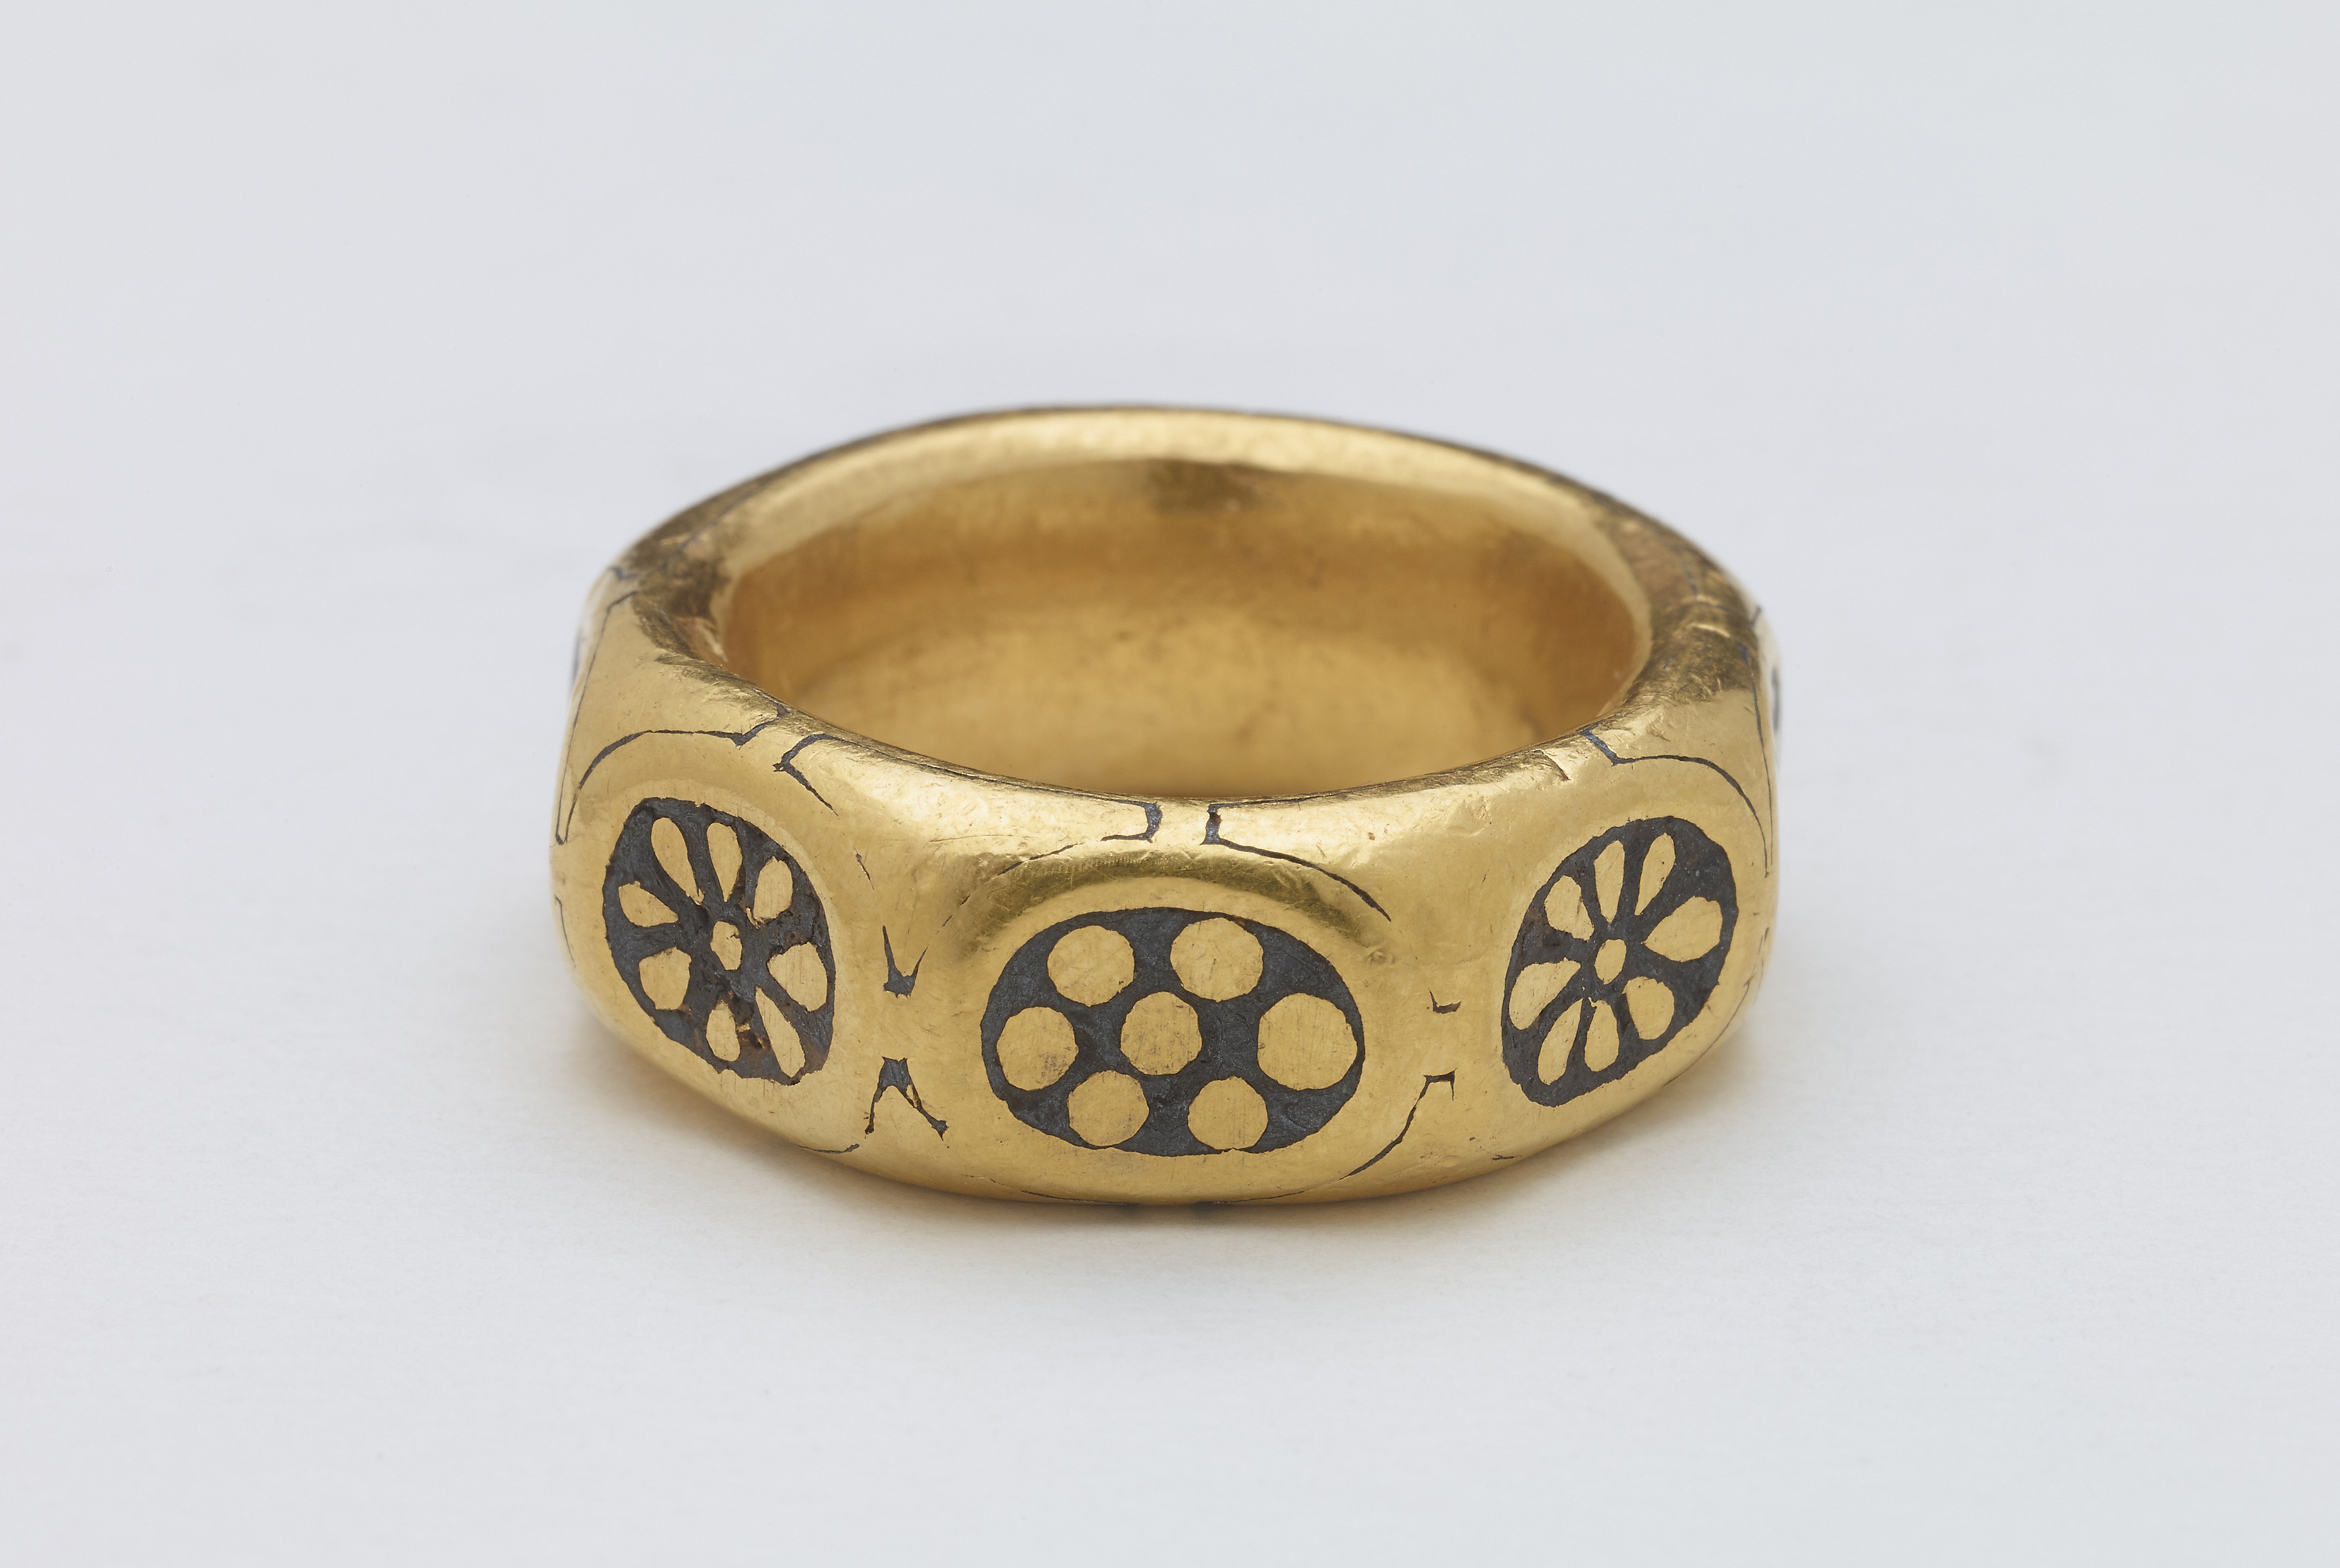 An octagonal gold ring from the Herefordshire Hoard, a Viking treasure found in a field near Leominster